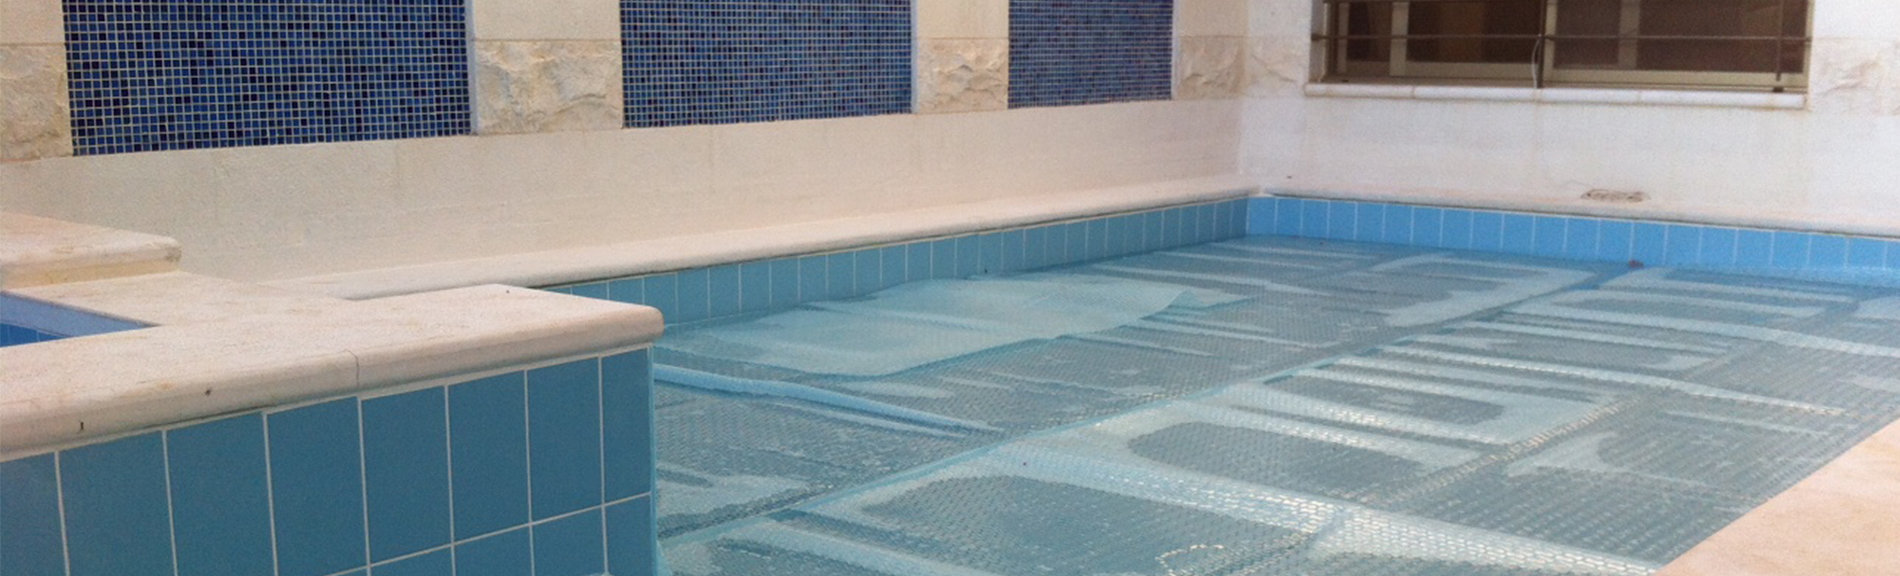 sol+guard pool cover on swimming pool